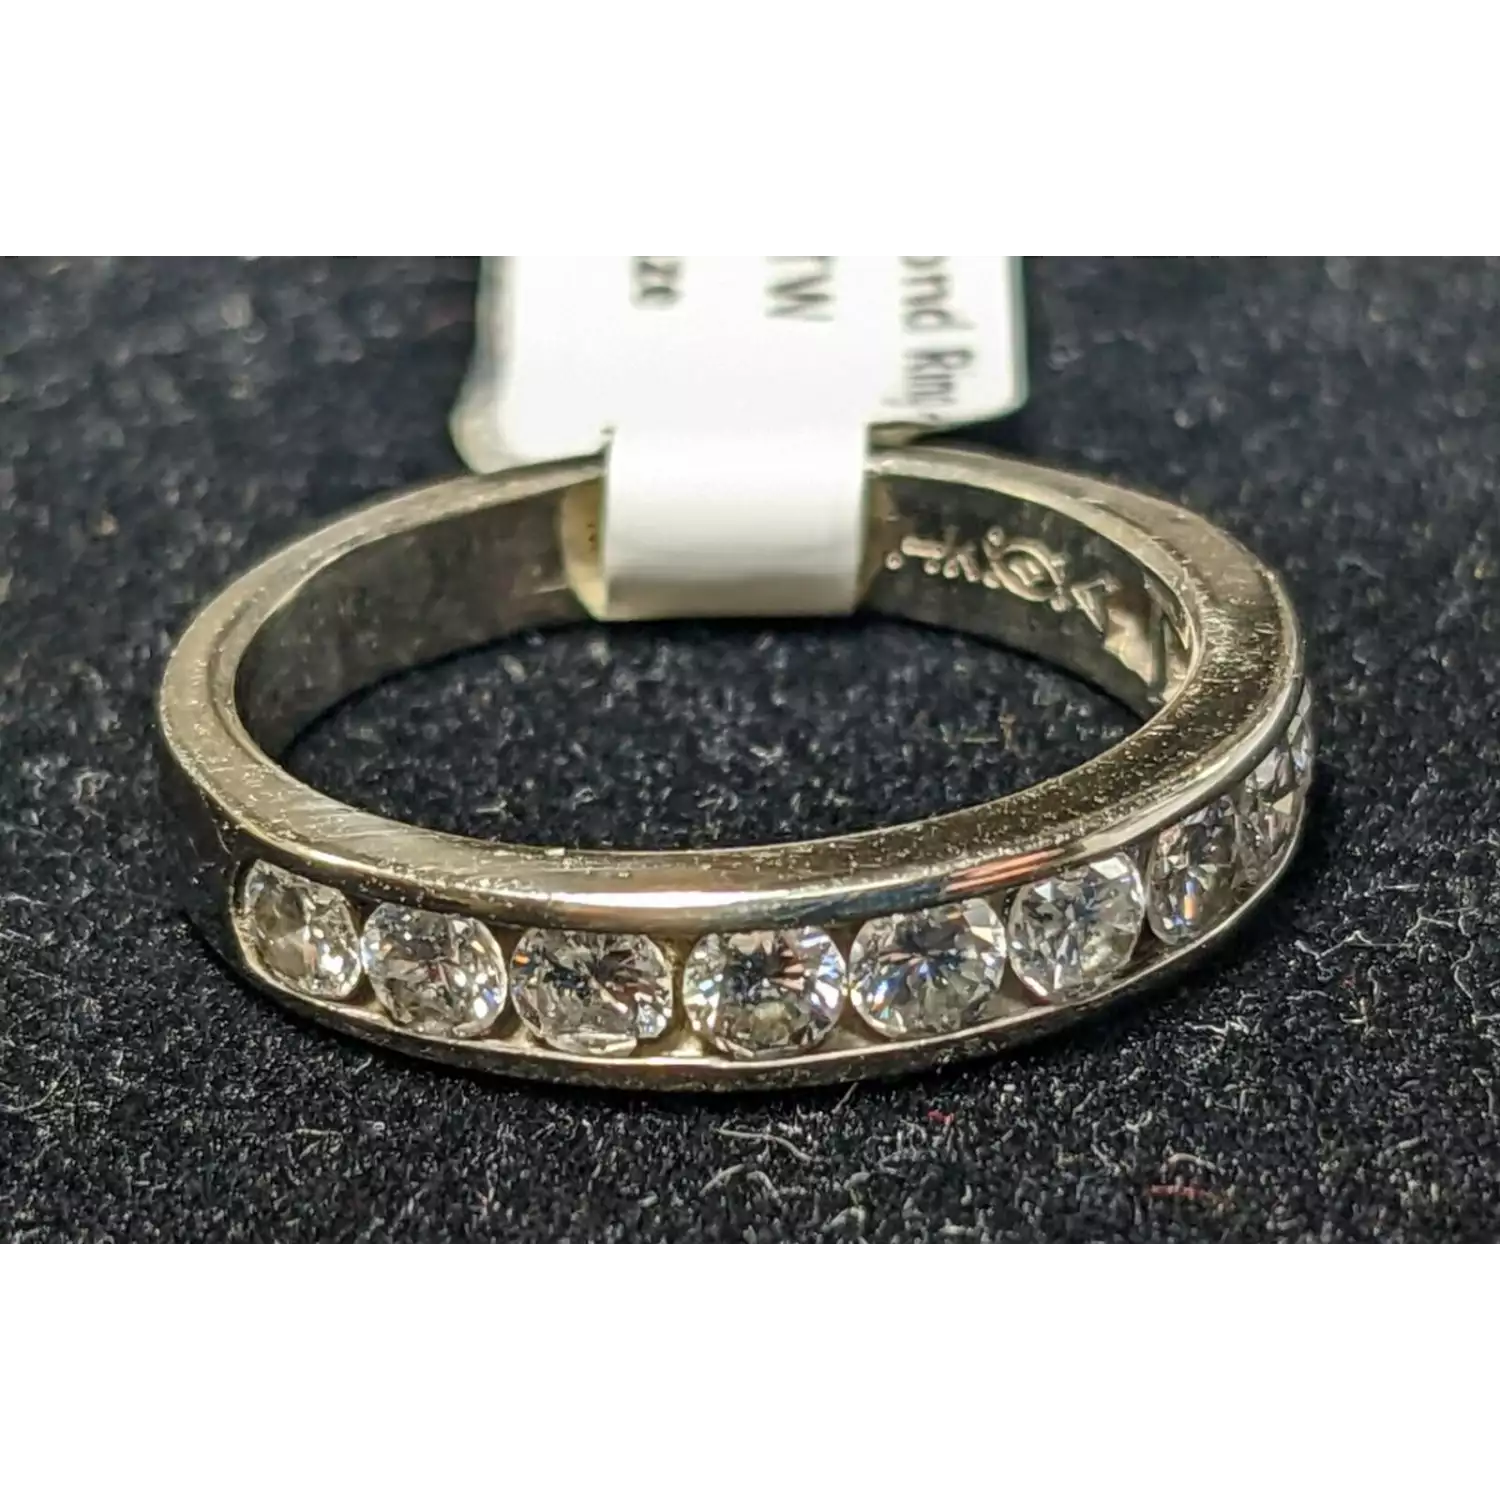 14k WG 1.0 CTW Chanel Set Diamond Ring 3.9g Size 7.5 - Quality Coin and Gold